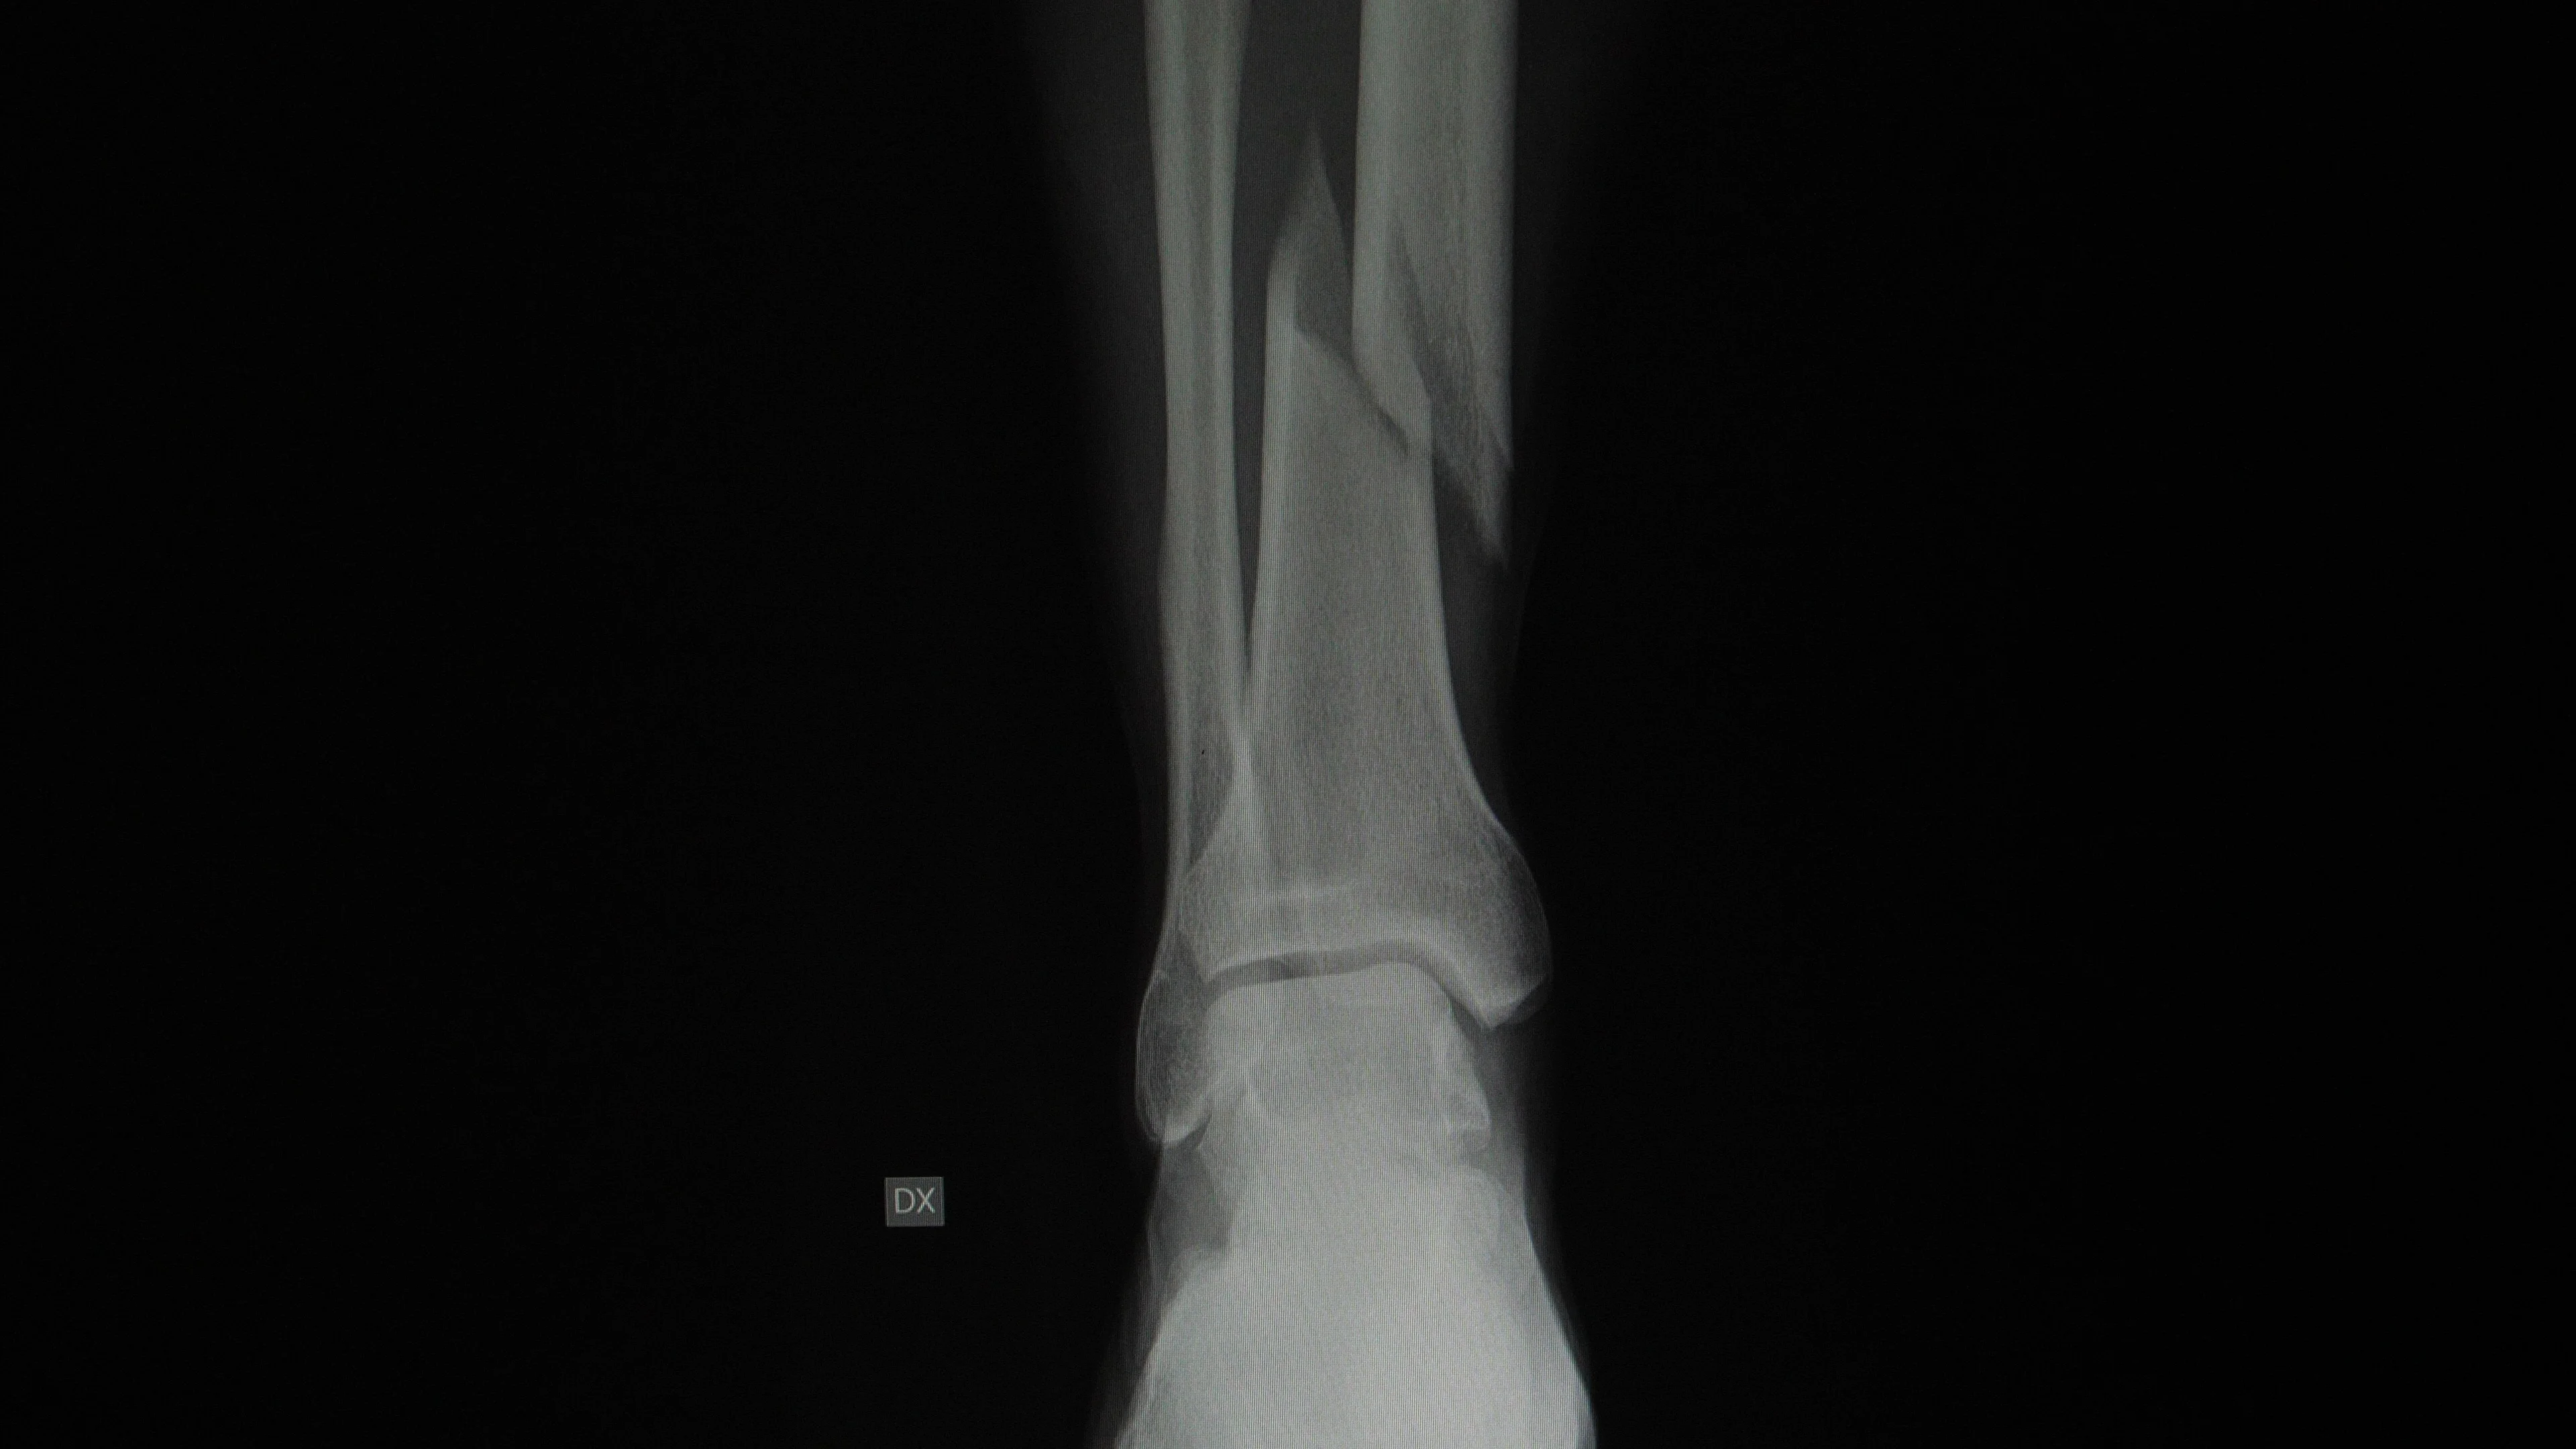 compound fracture x ray